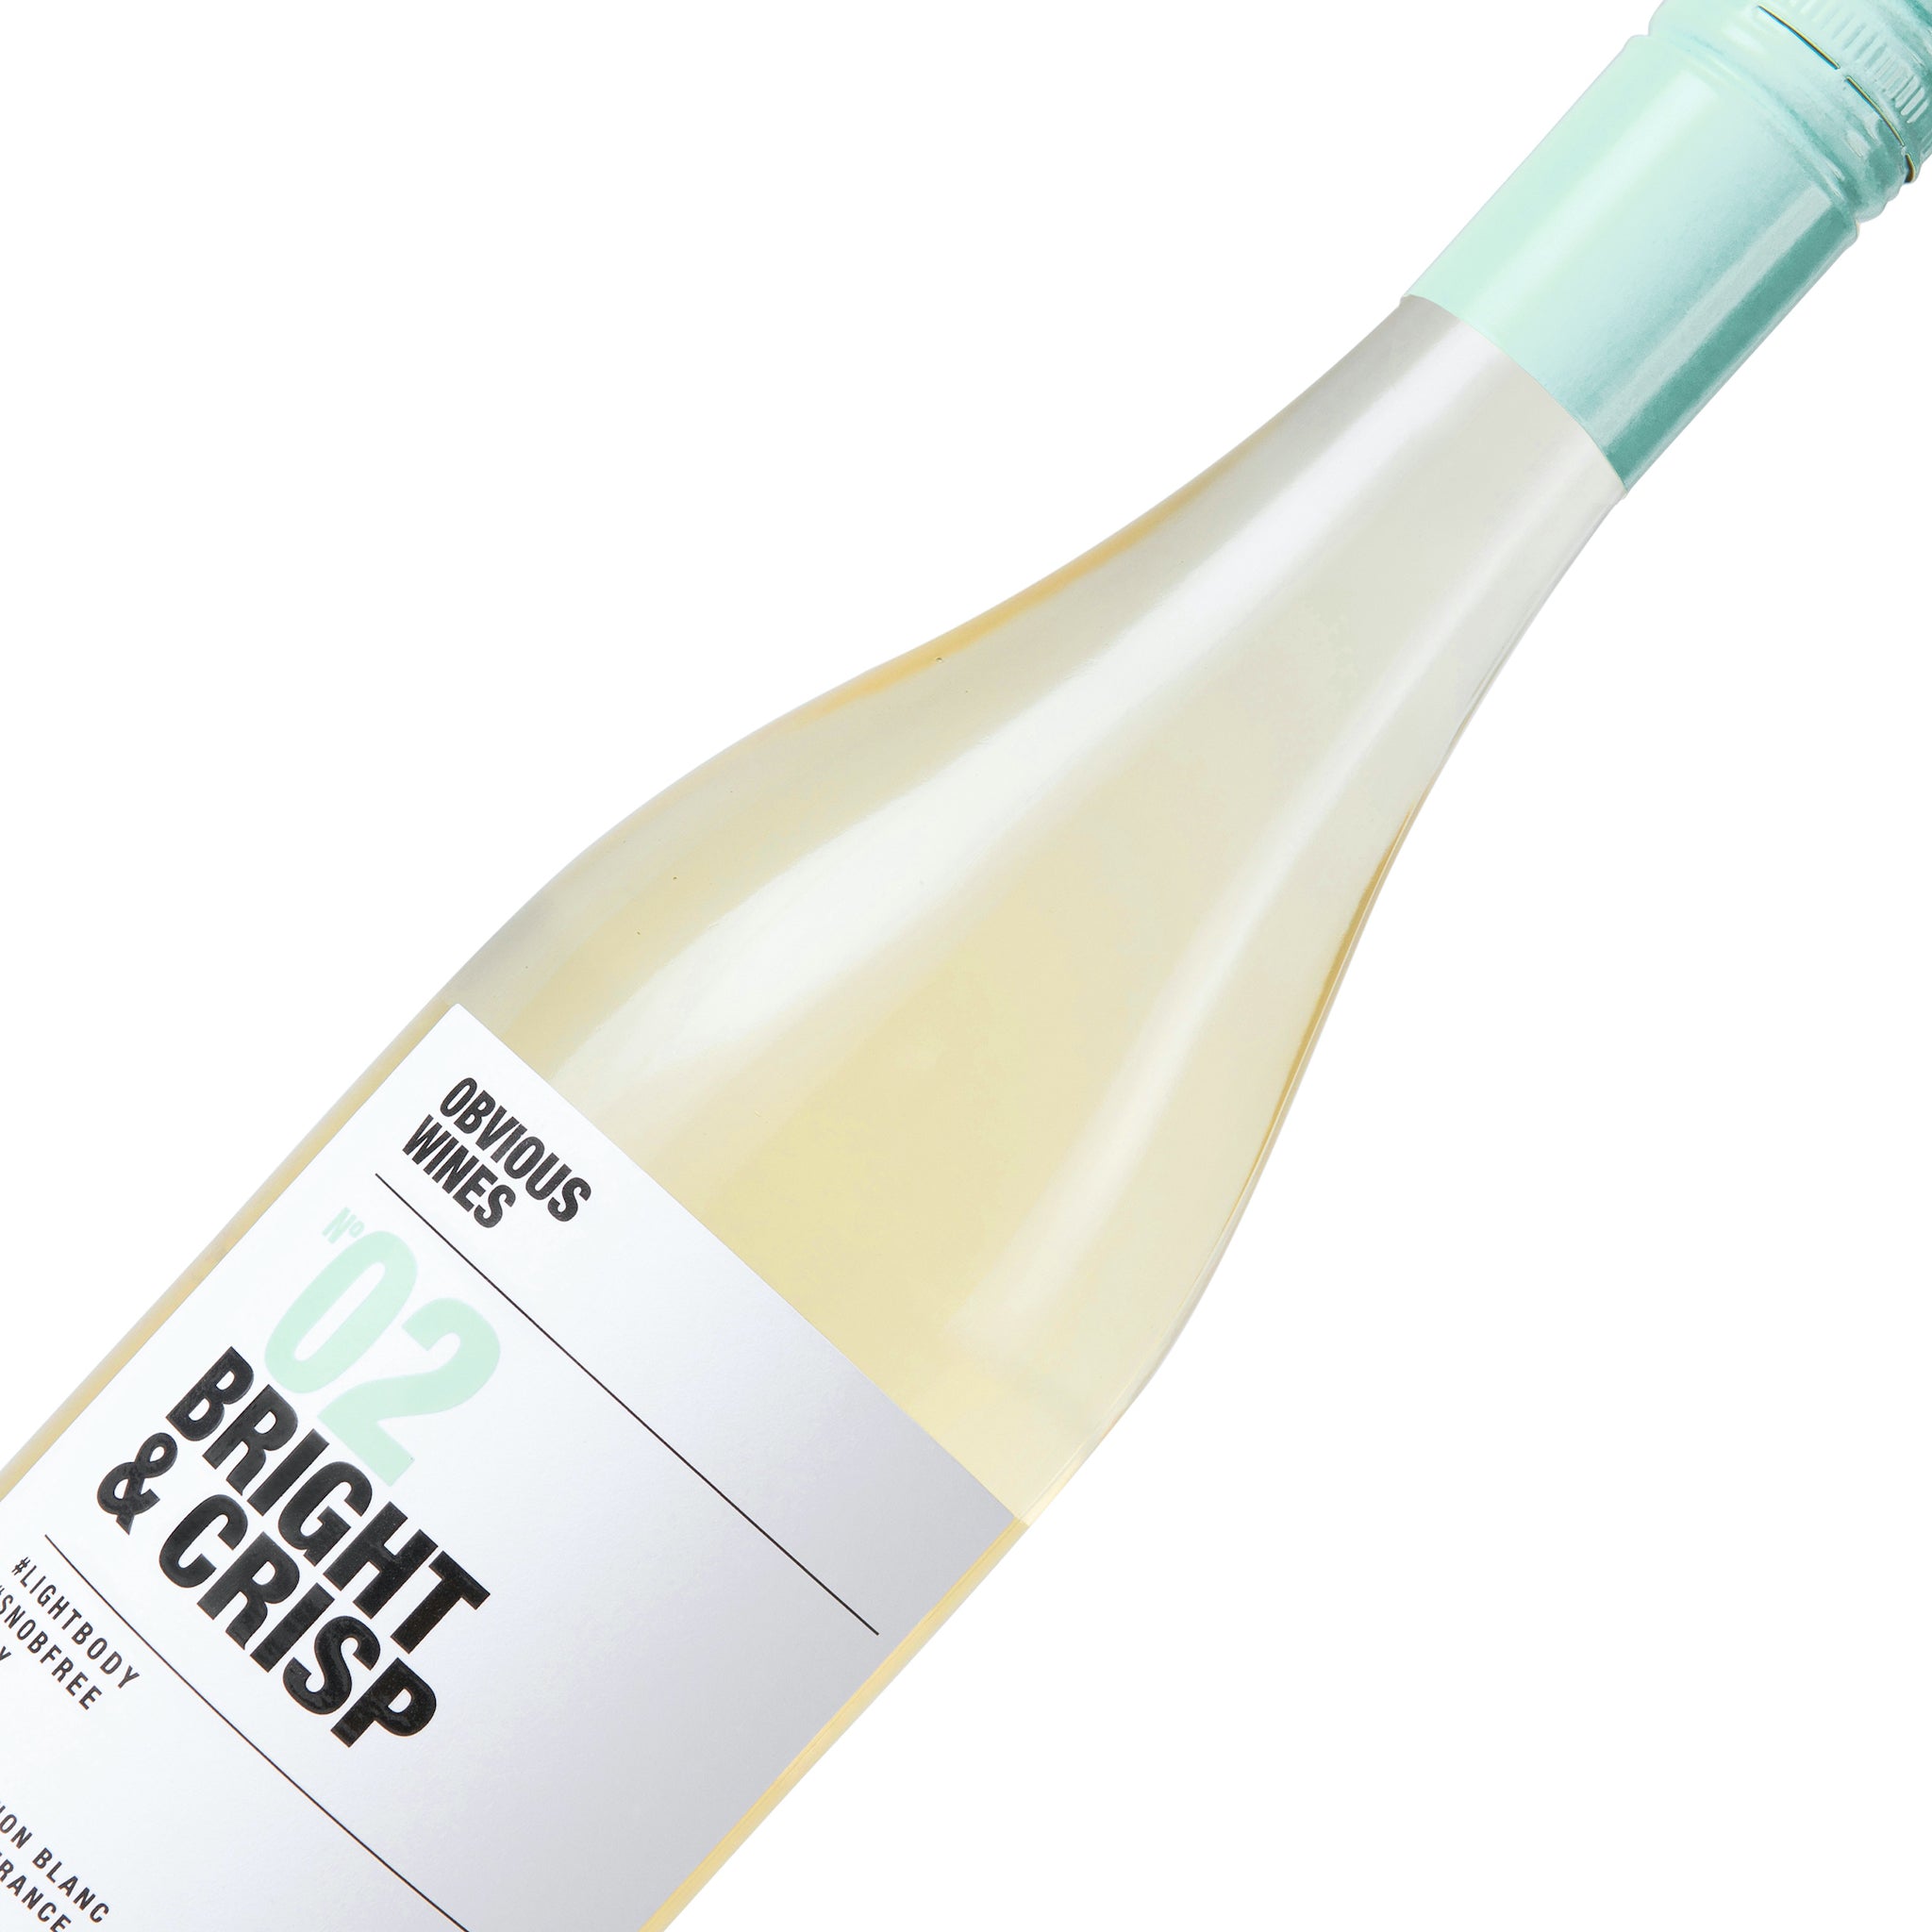 Nº02 BRIGHT and CRISP - Obvious Wines